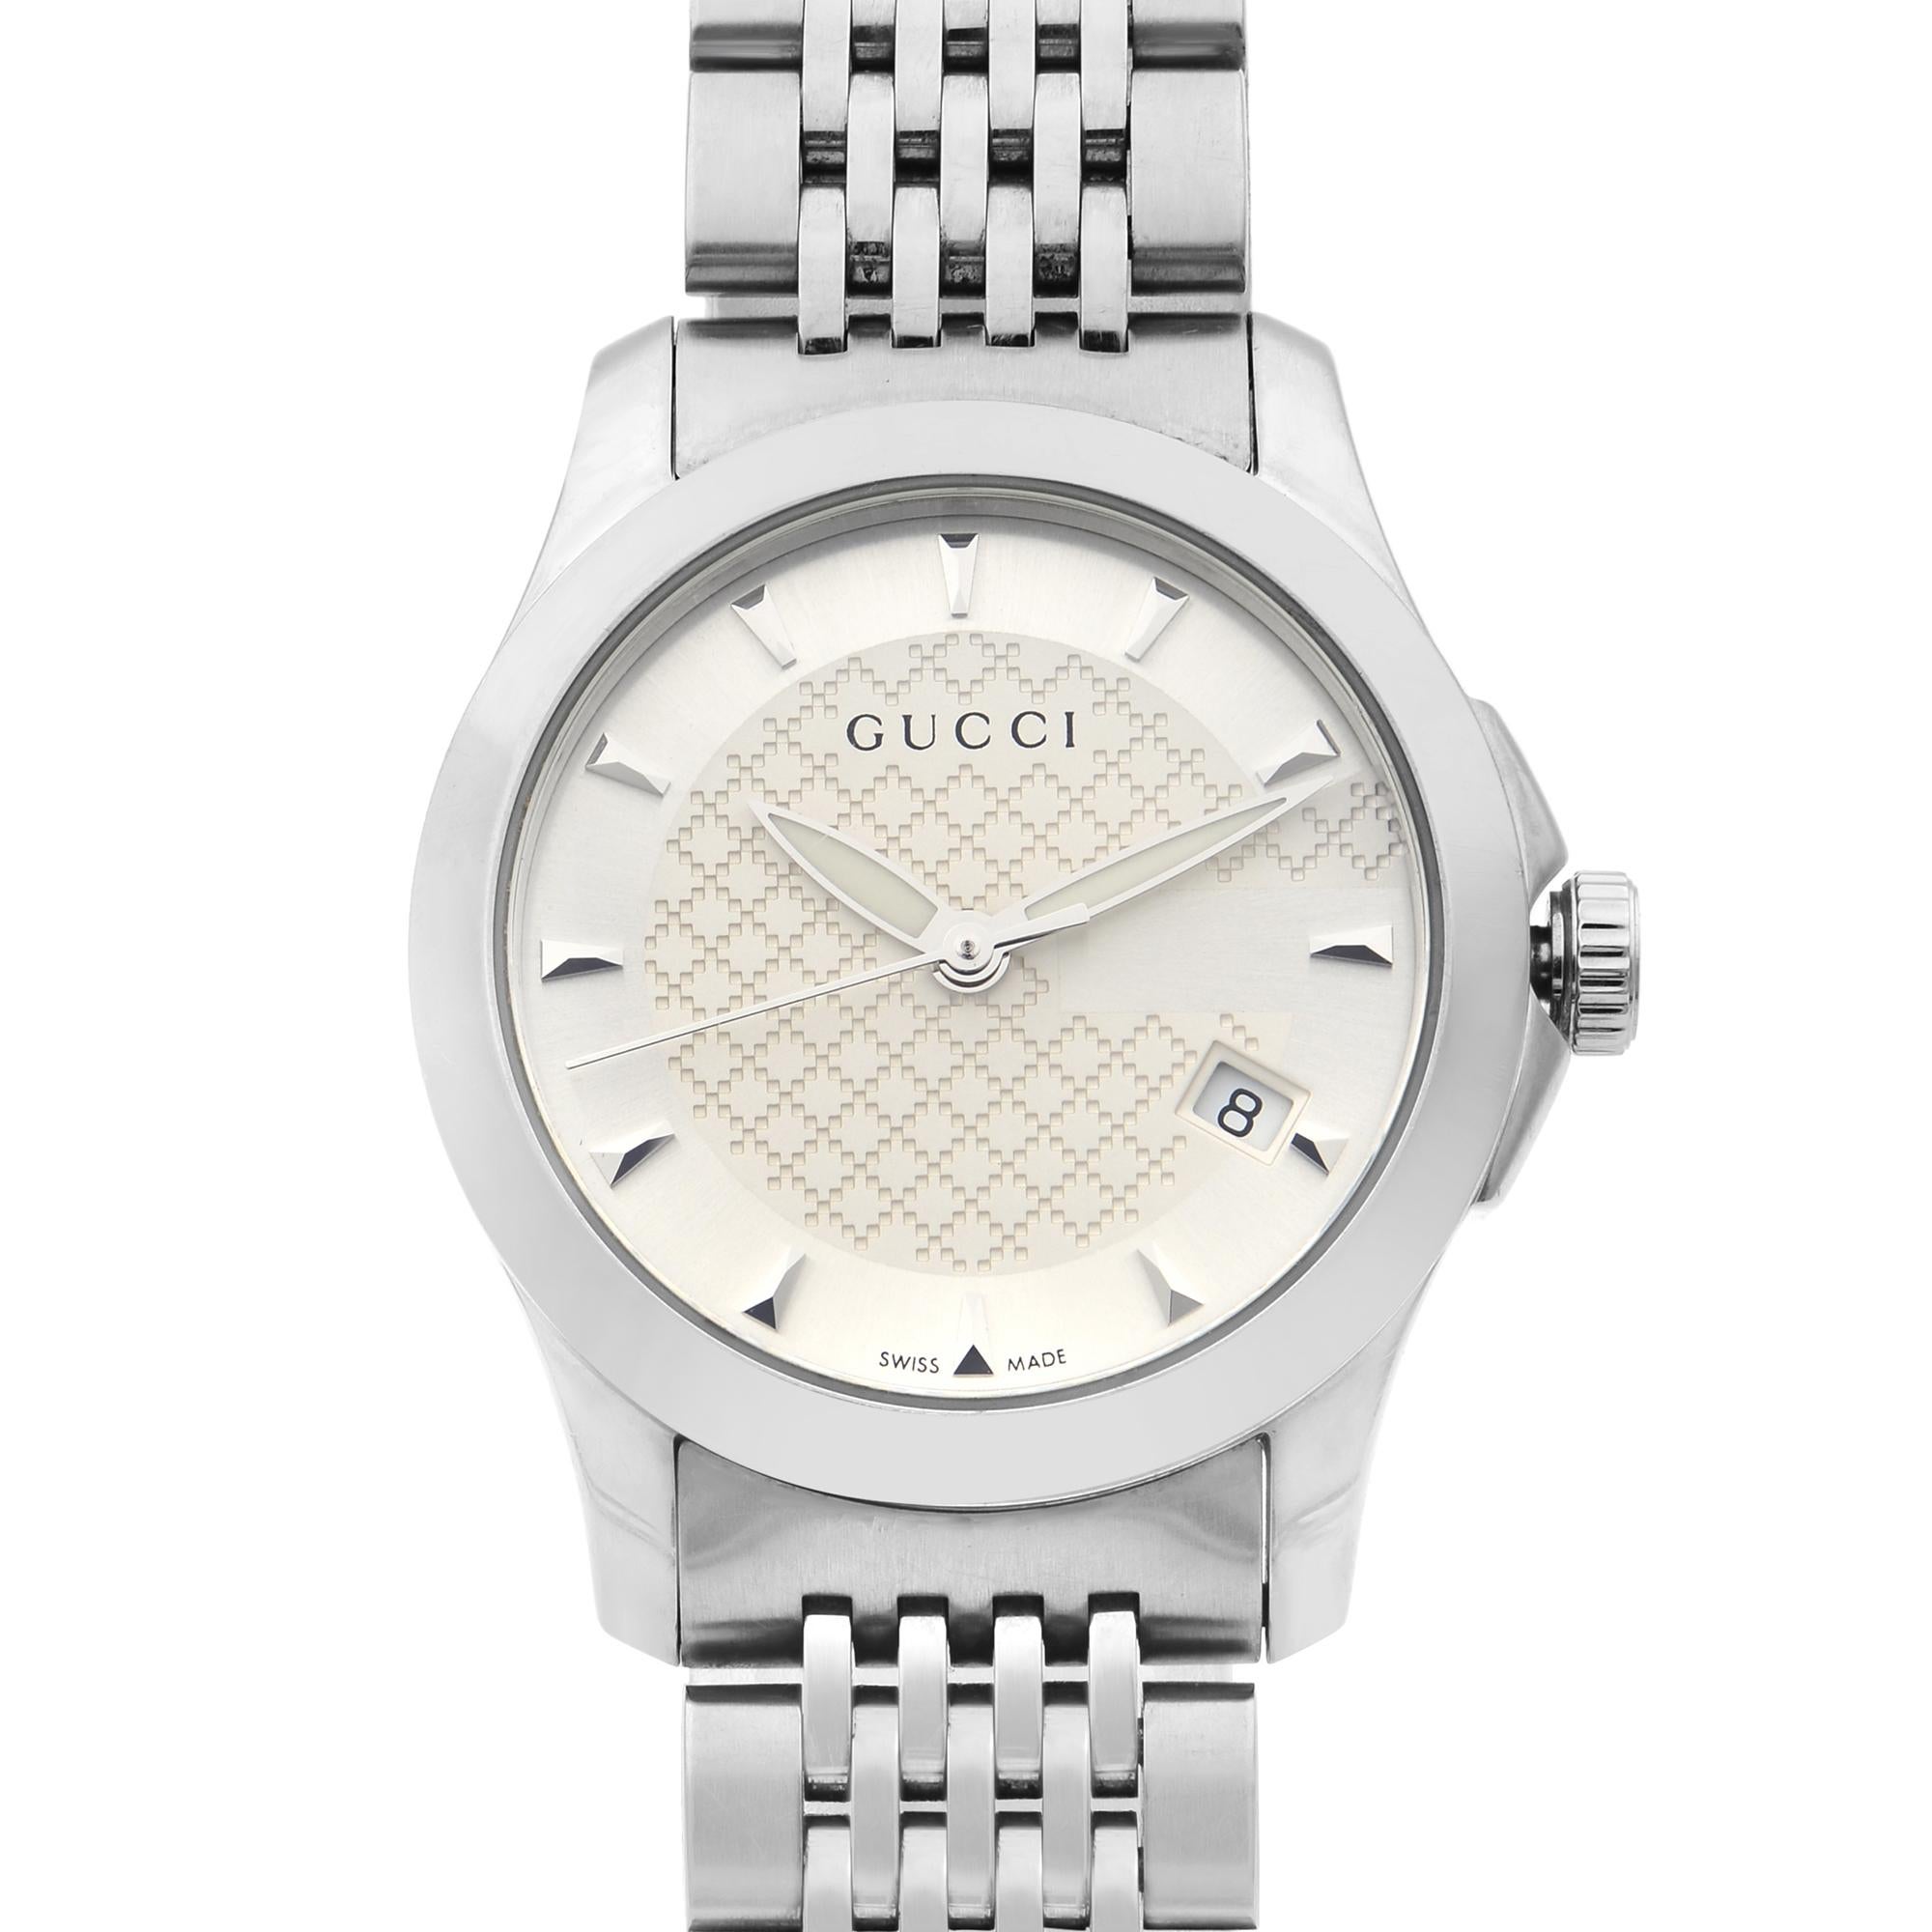 This display model Gucci G-Timeless YA126501 is a beautiful Ladies timepiece that is powered by a quartz movement which is cased in a stainless steel case. It has a round shape face, date dial and has hand sticks style markers. Case Diameter 27 mm,